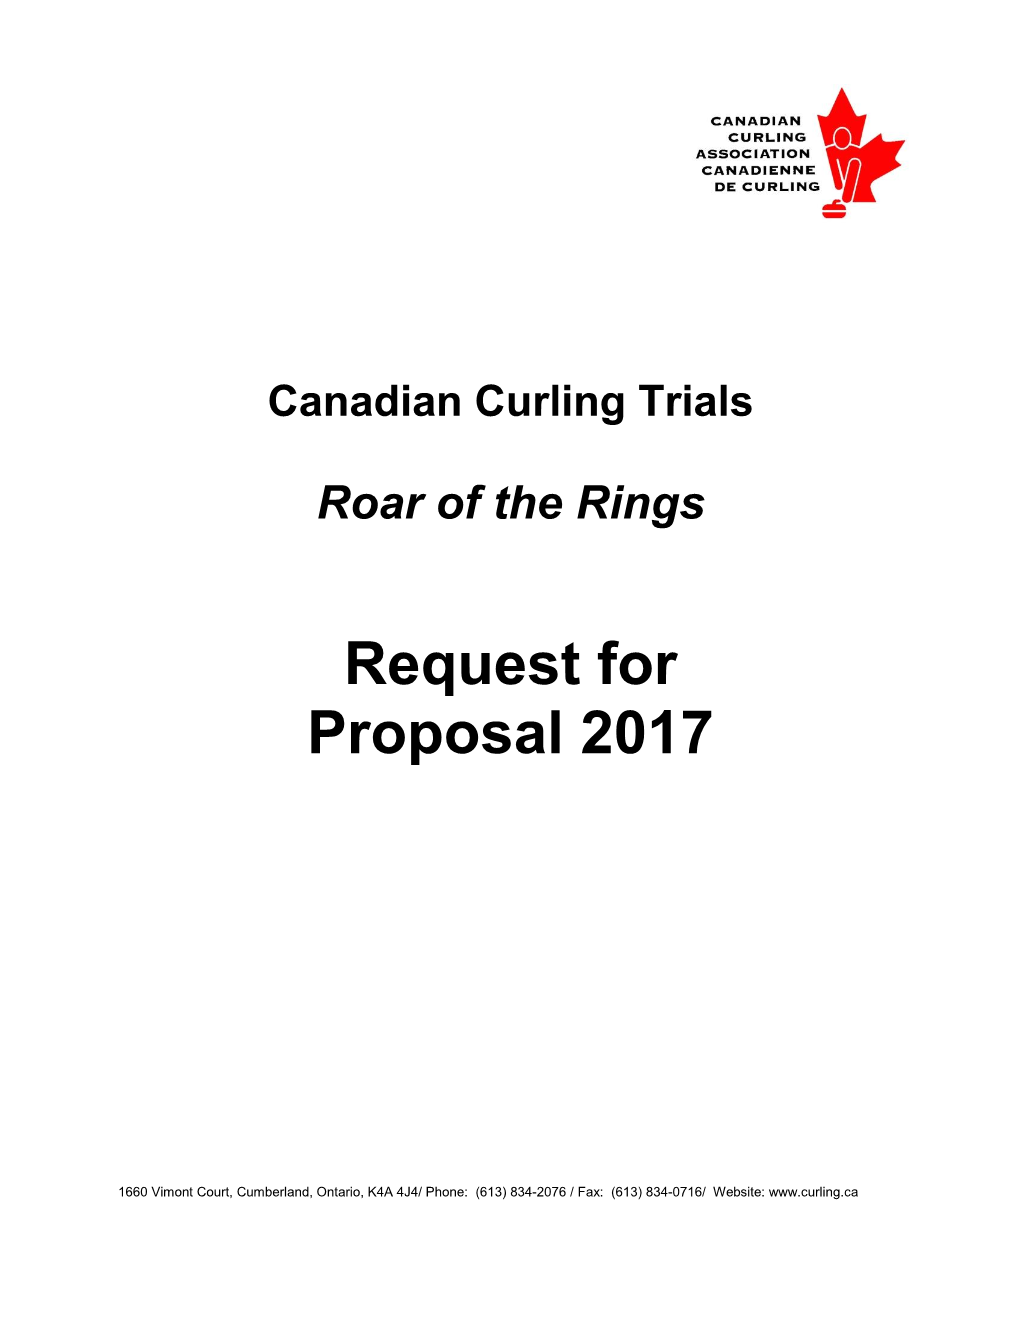 2017 Canadian Curling Trials, Roar of the Rings Request for Proposal